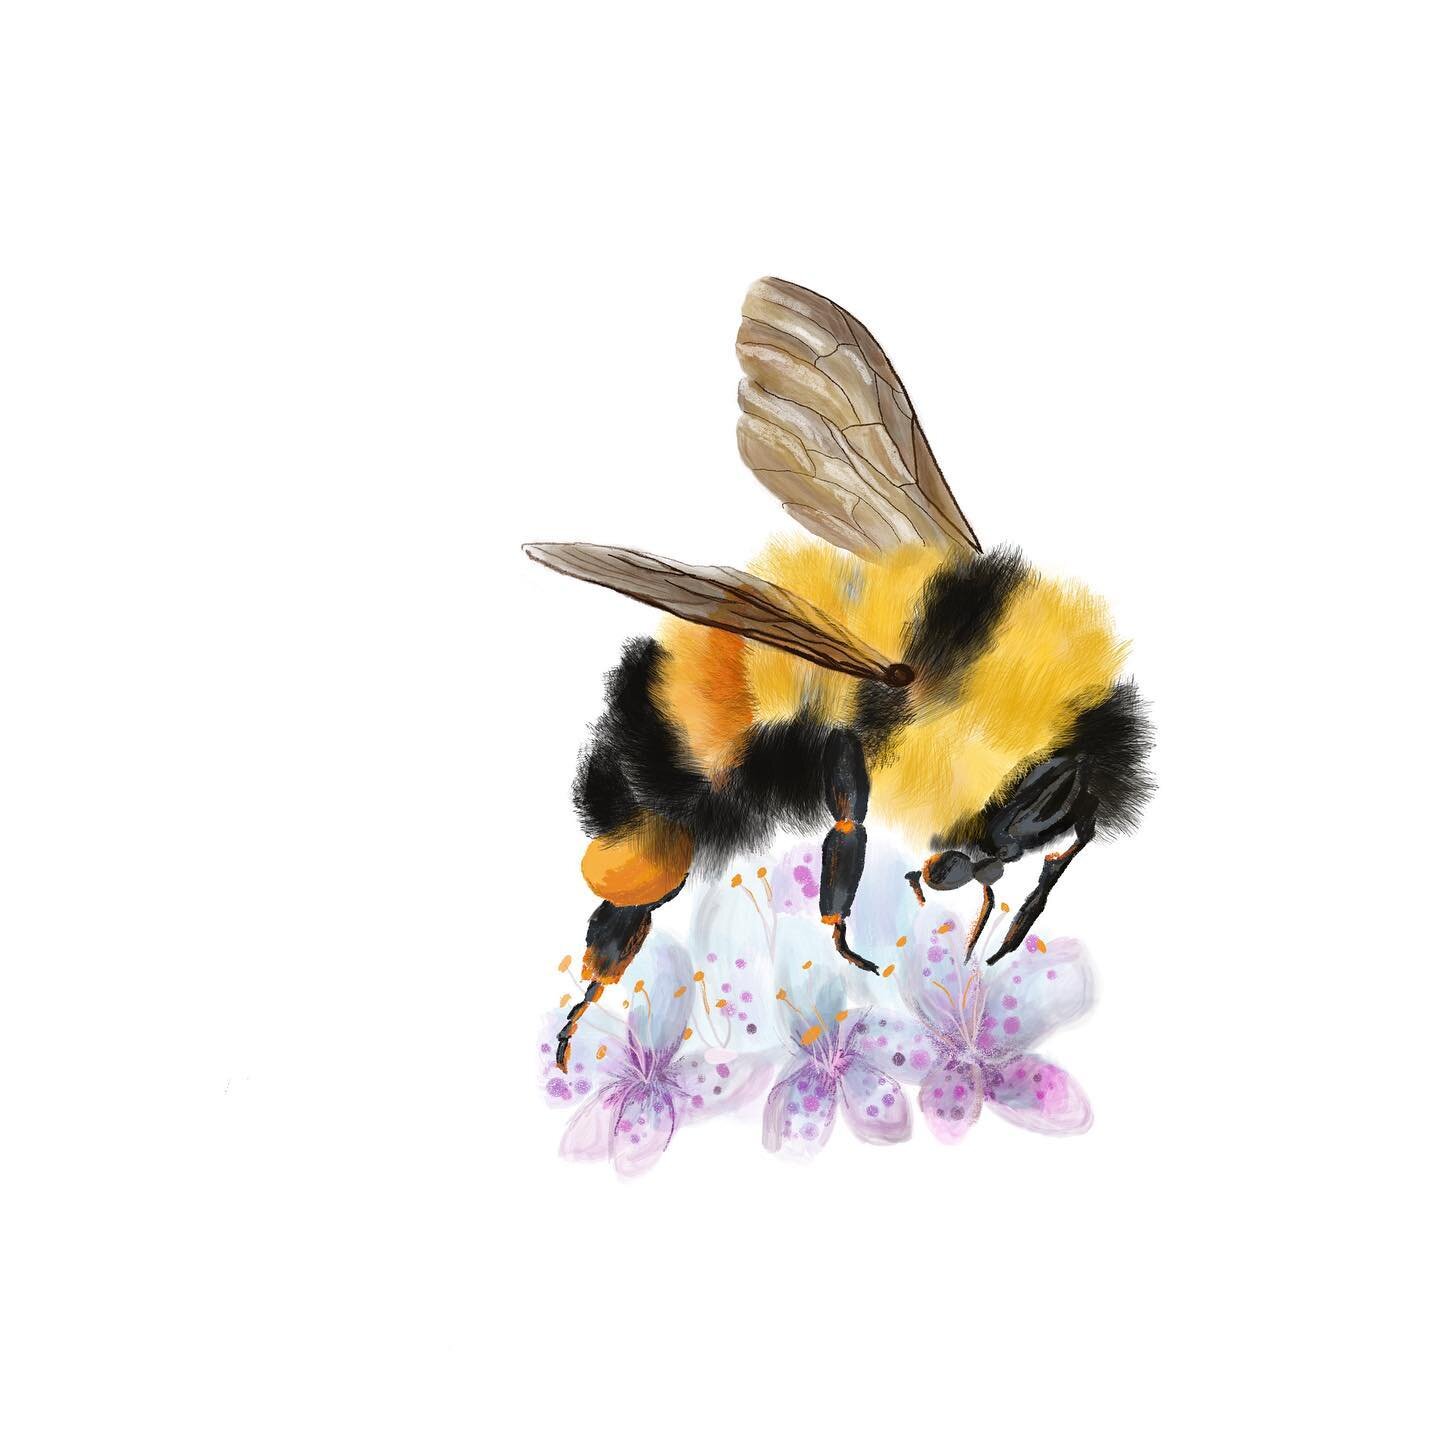 Rusty Patched Bumble Bee. Endangered. This species of bumble bee has declined 87% in the last twenty years. It is threatened by pesticide use, climate change, habitat loss, intensive farming and disease. 
.
.
.
.
#endangeredspecies #rustypatchedbumbl